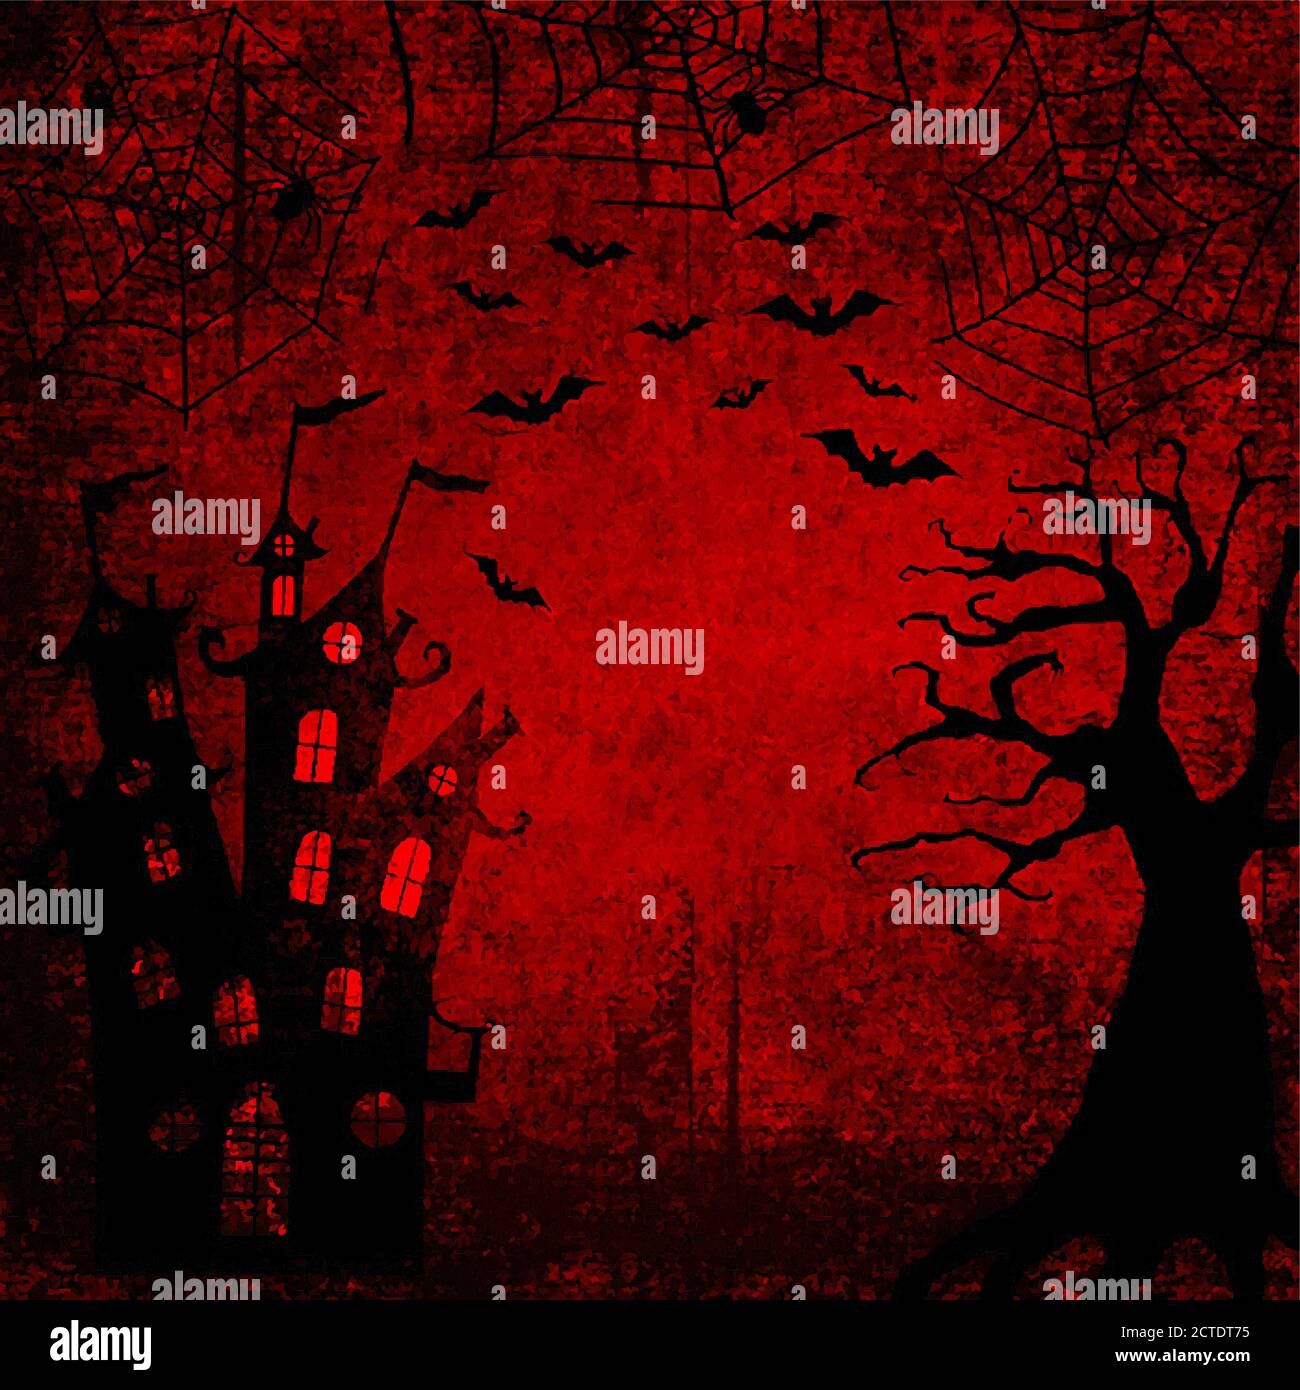 Halloween bloody red grunge background with silhouettes of bats, terrible dead tree, castle, webs and spiders on dark spooky night sky. Halloween, hor Stock Vector